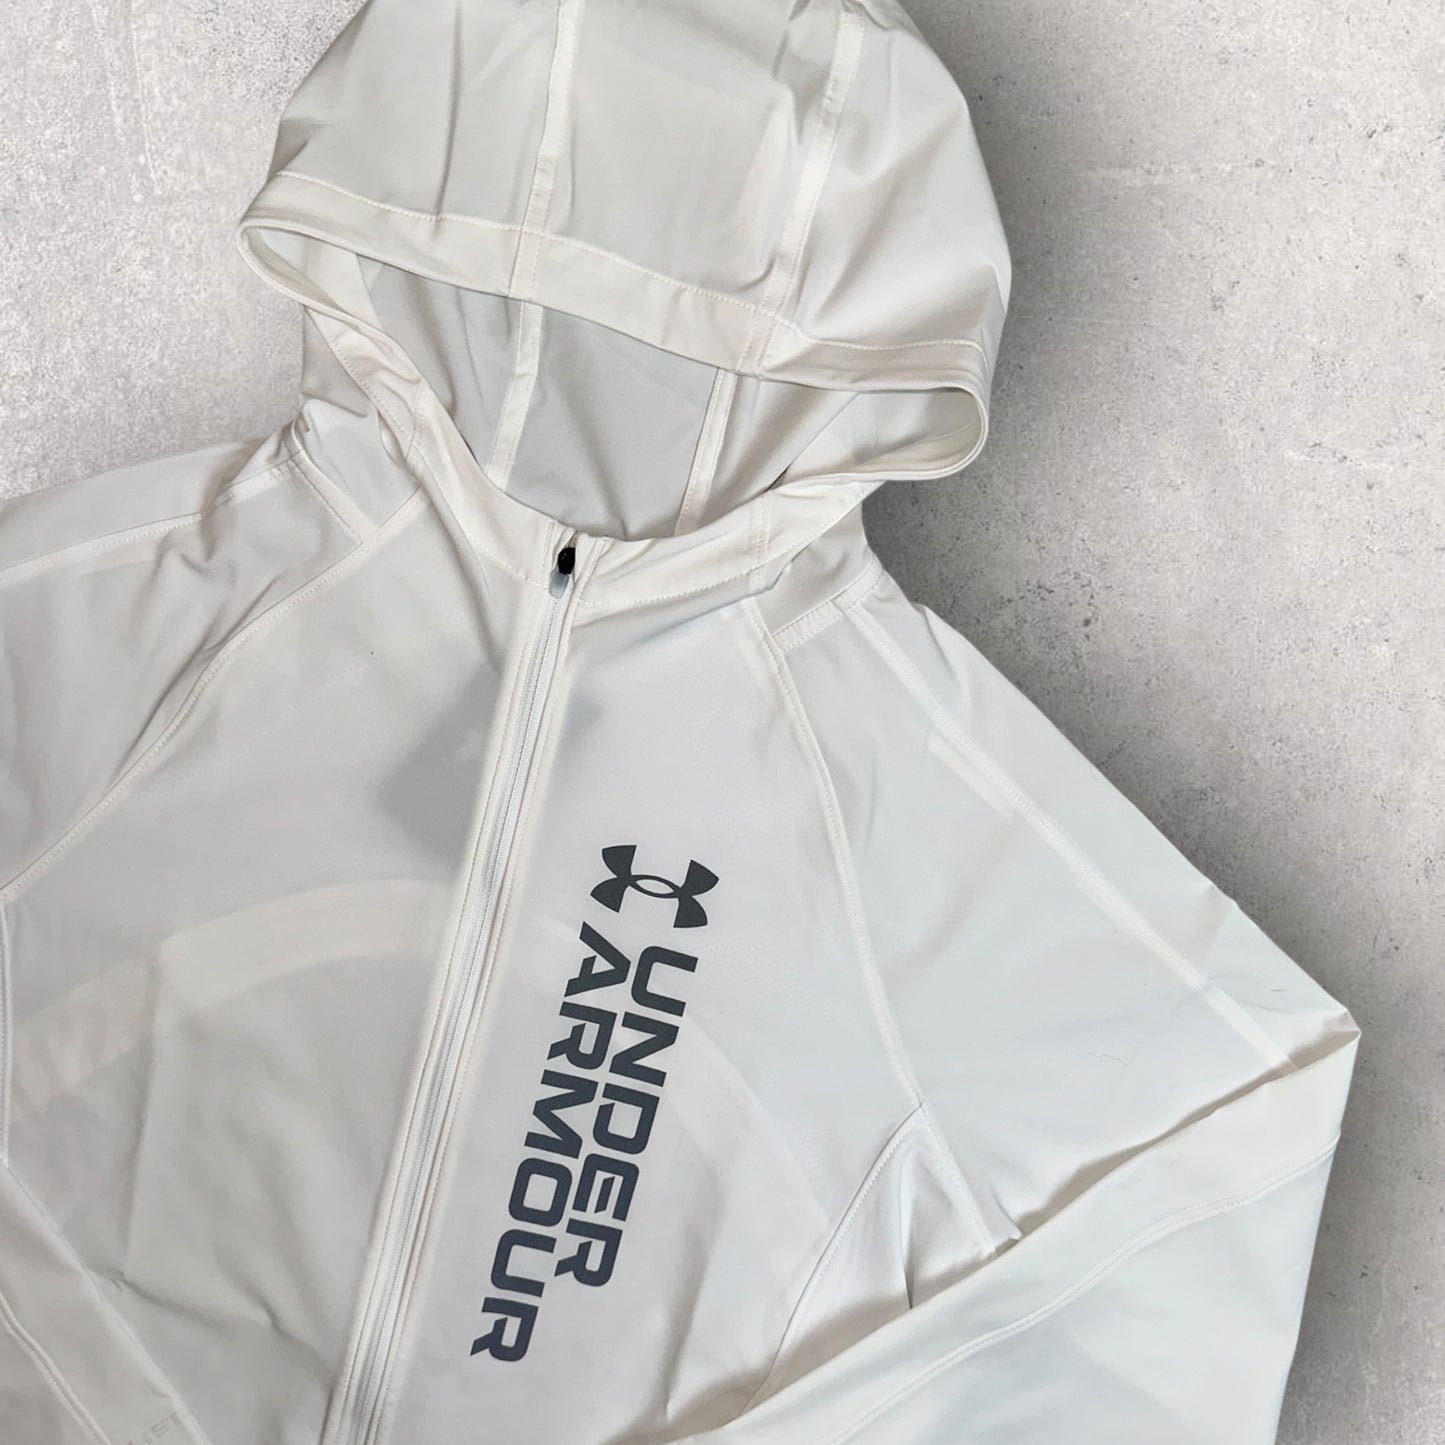 UNDER ARMOUR STORM JACKET - WHITE